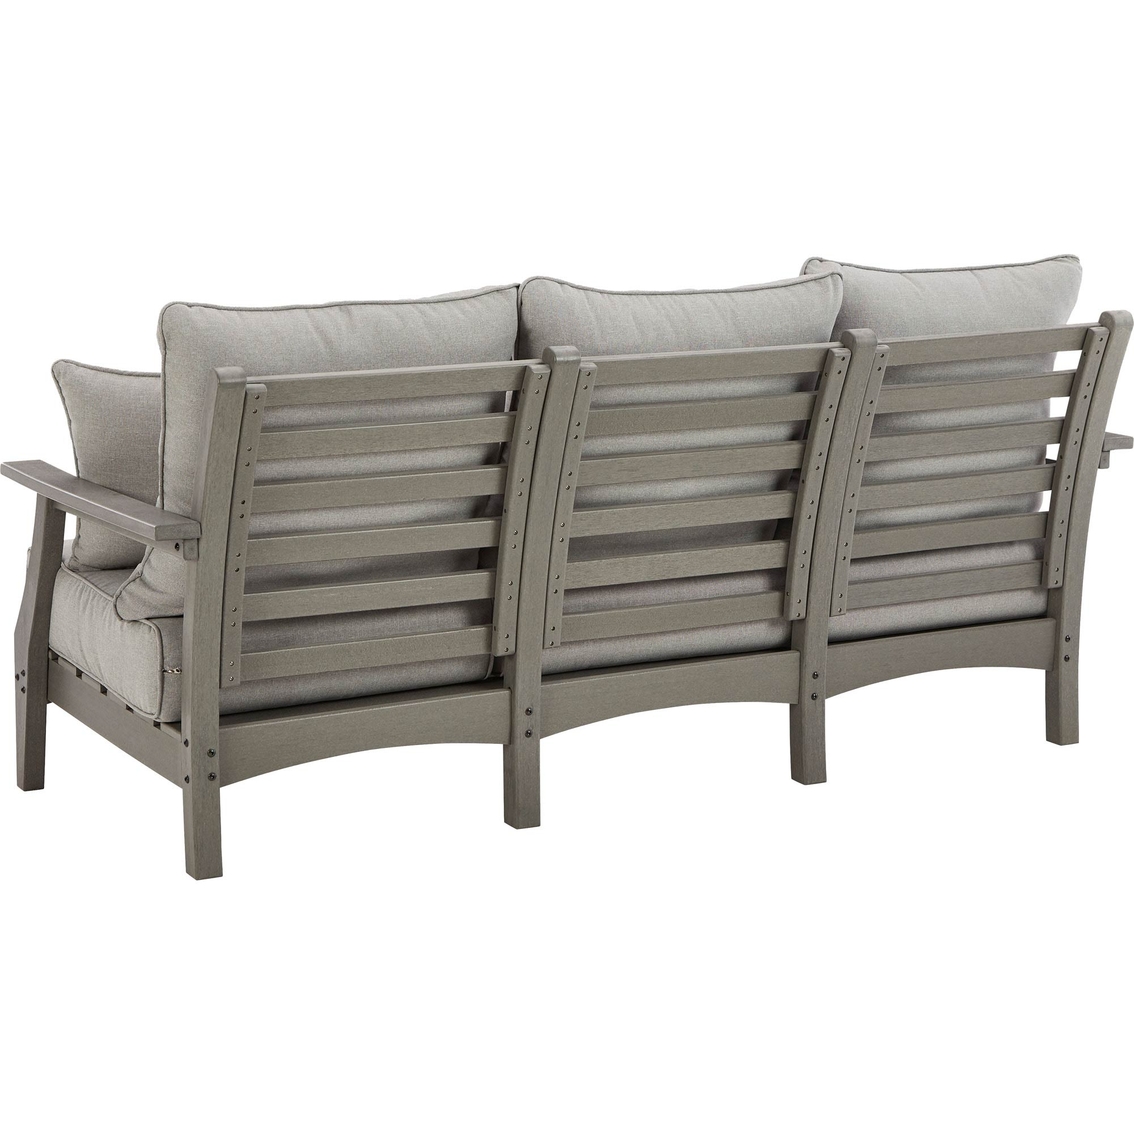 Signature Design by Ashley Visola 6 pc. Outdoor Seating Set with Sofa - Image 6 of 9